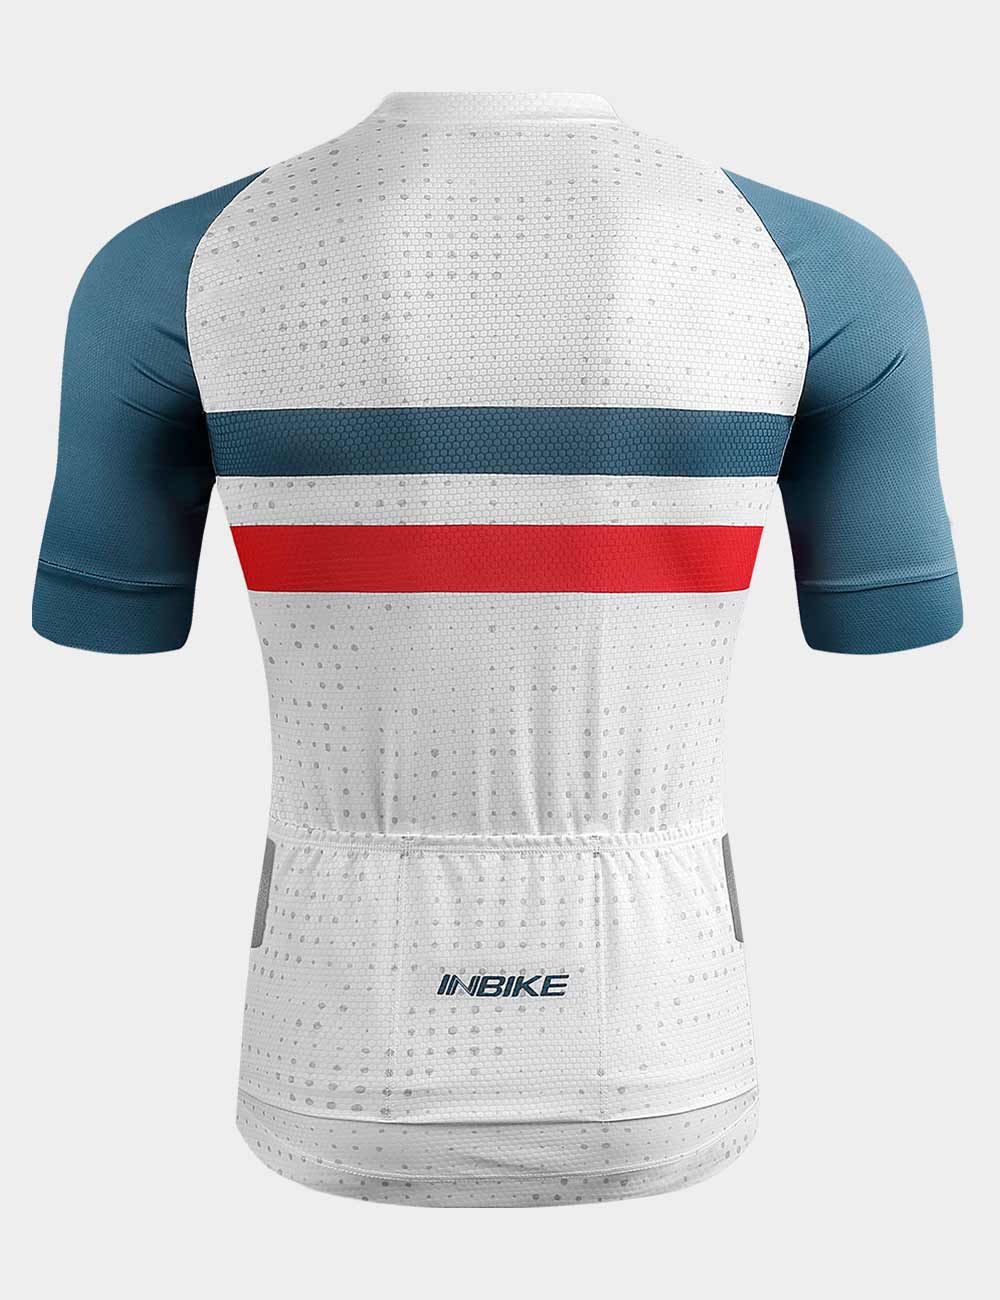 Details about   Men Road Bike Clothing Short Sleeve Jersey Bibs Shorts Kits Riding Outfits Pants 